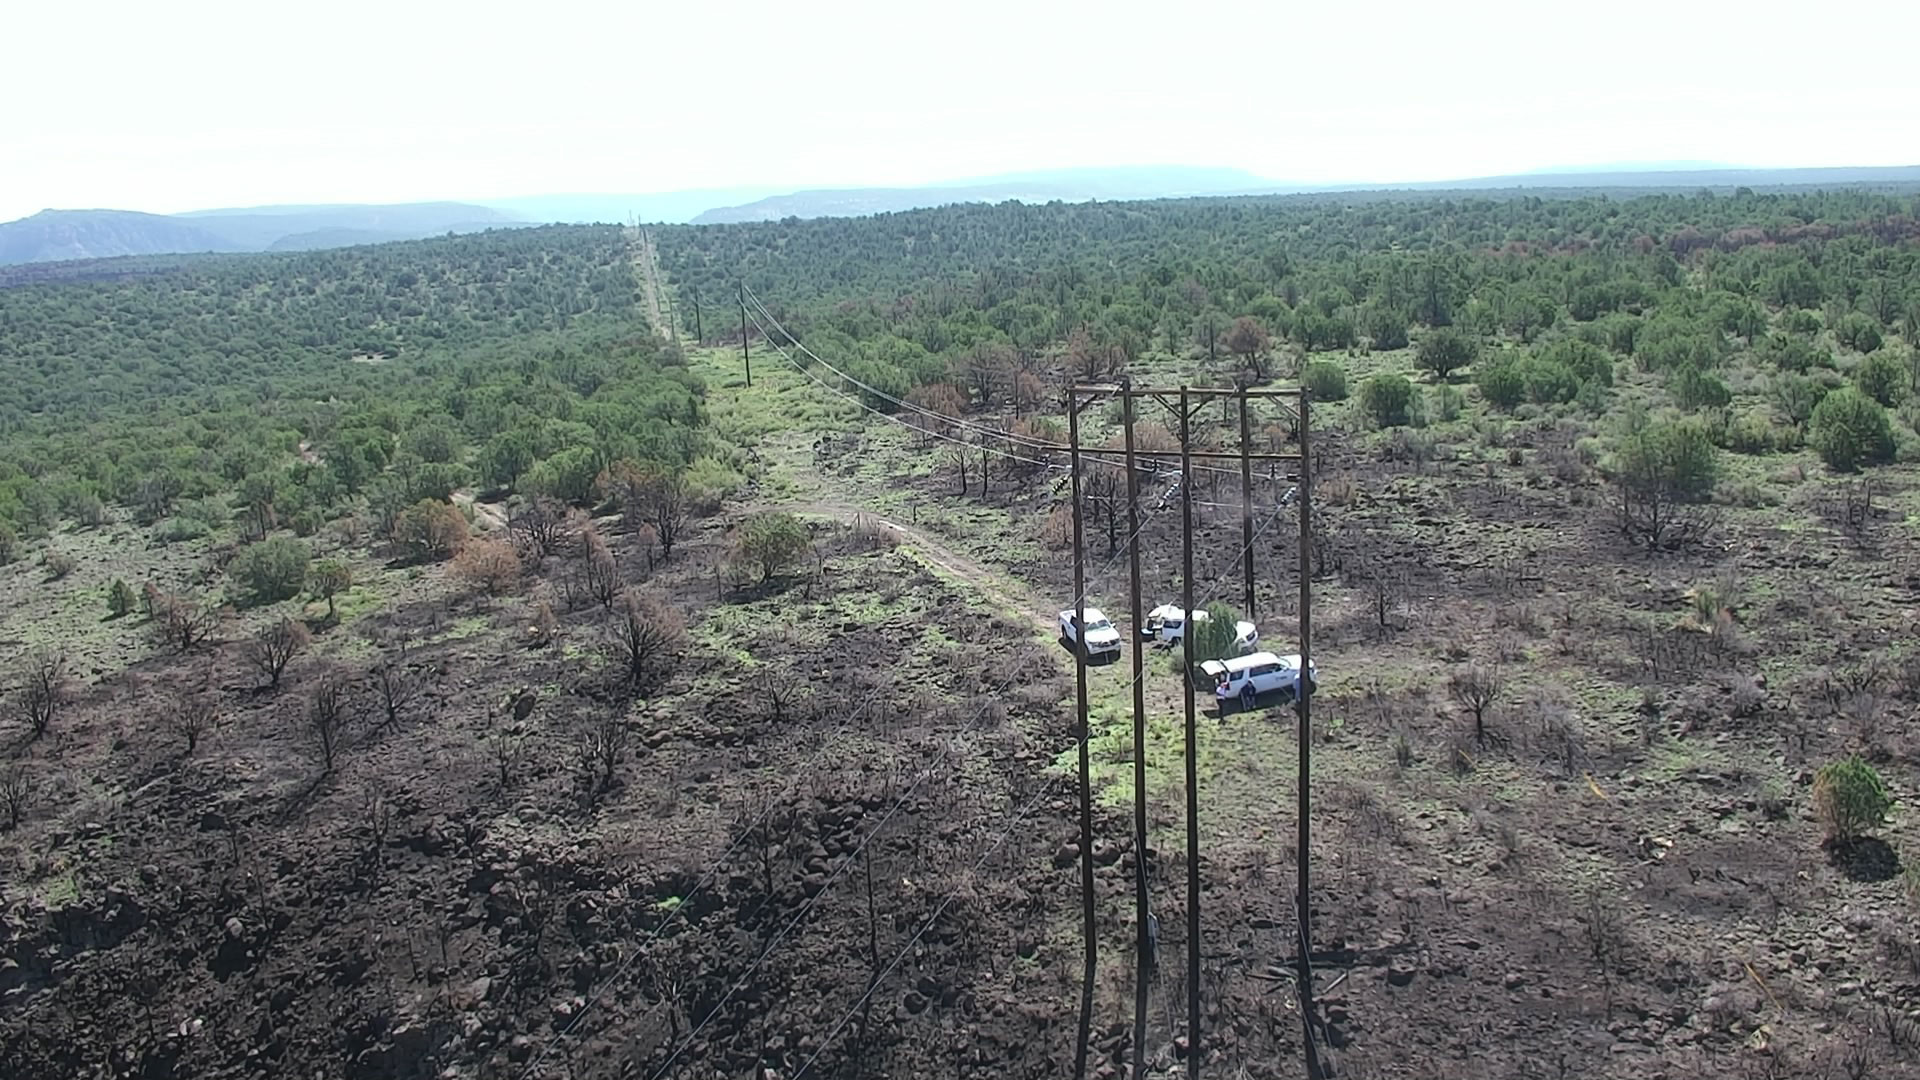 aerial view of transmission lines with wildfire damage around a portion of the lines